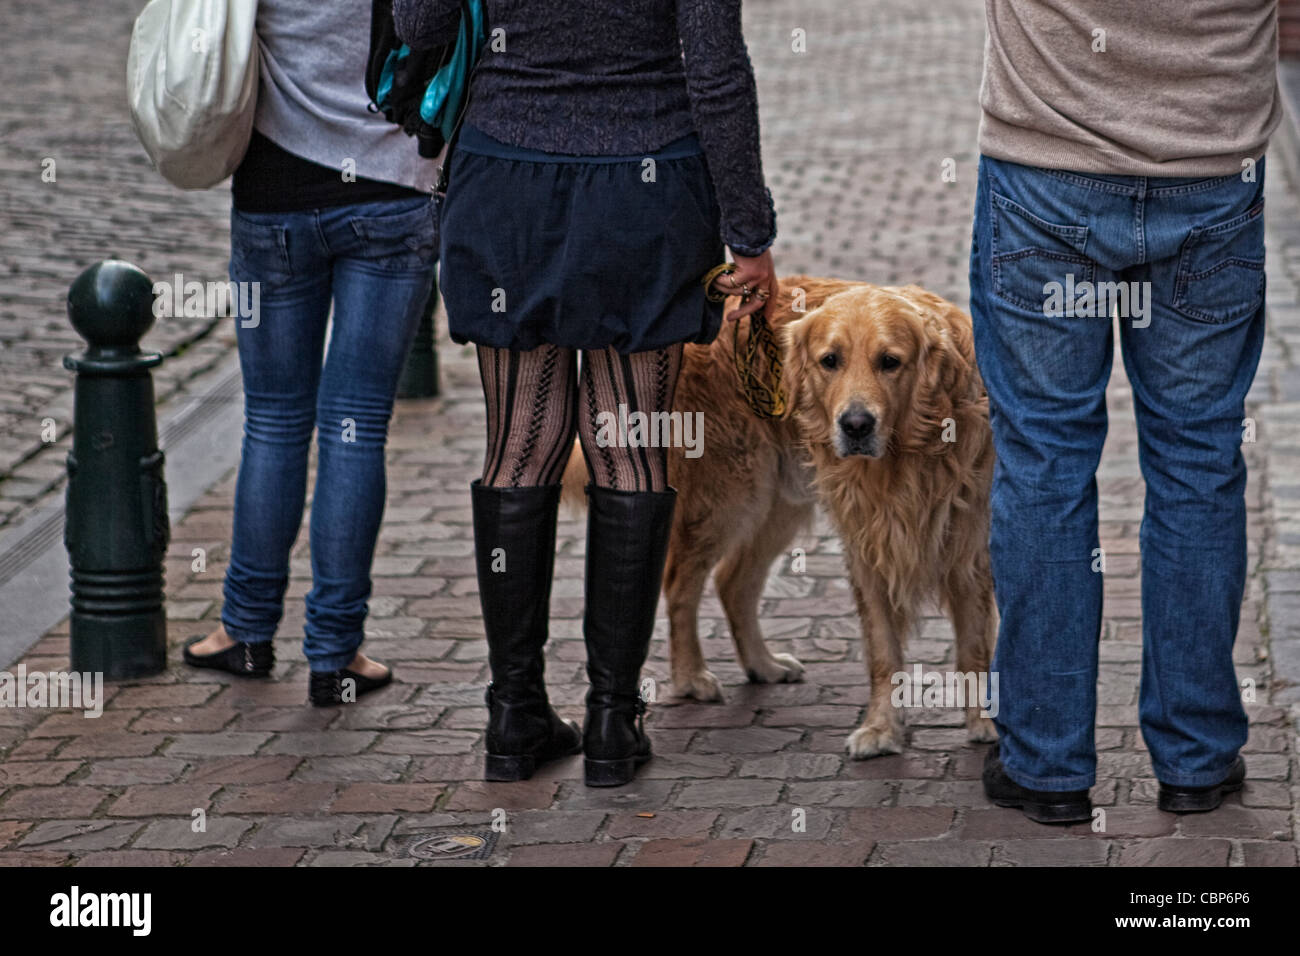 Rear view of three people and a dog on a Brussels street. Stock Photo